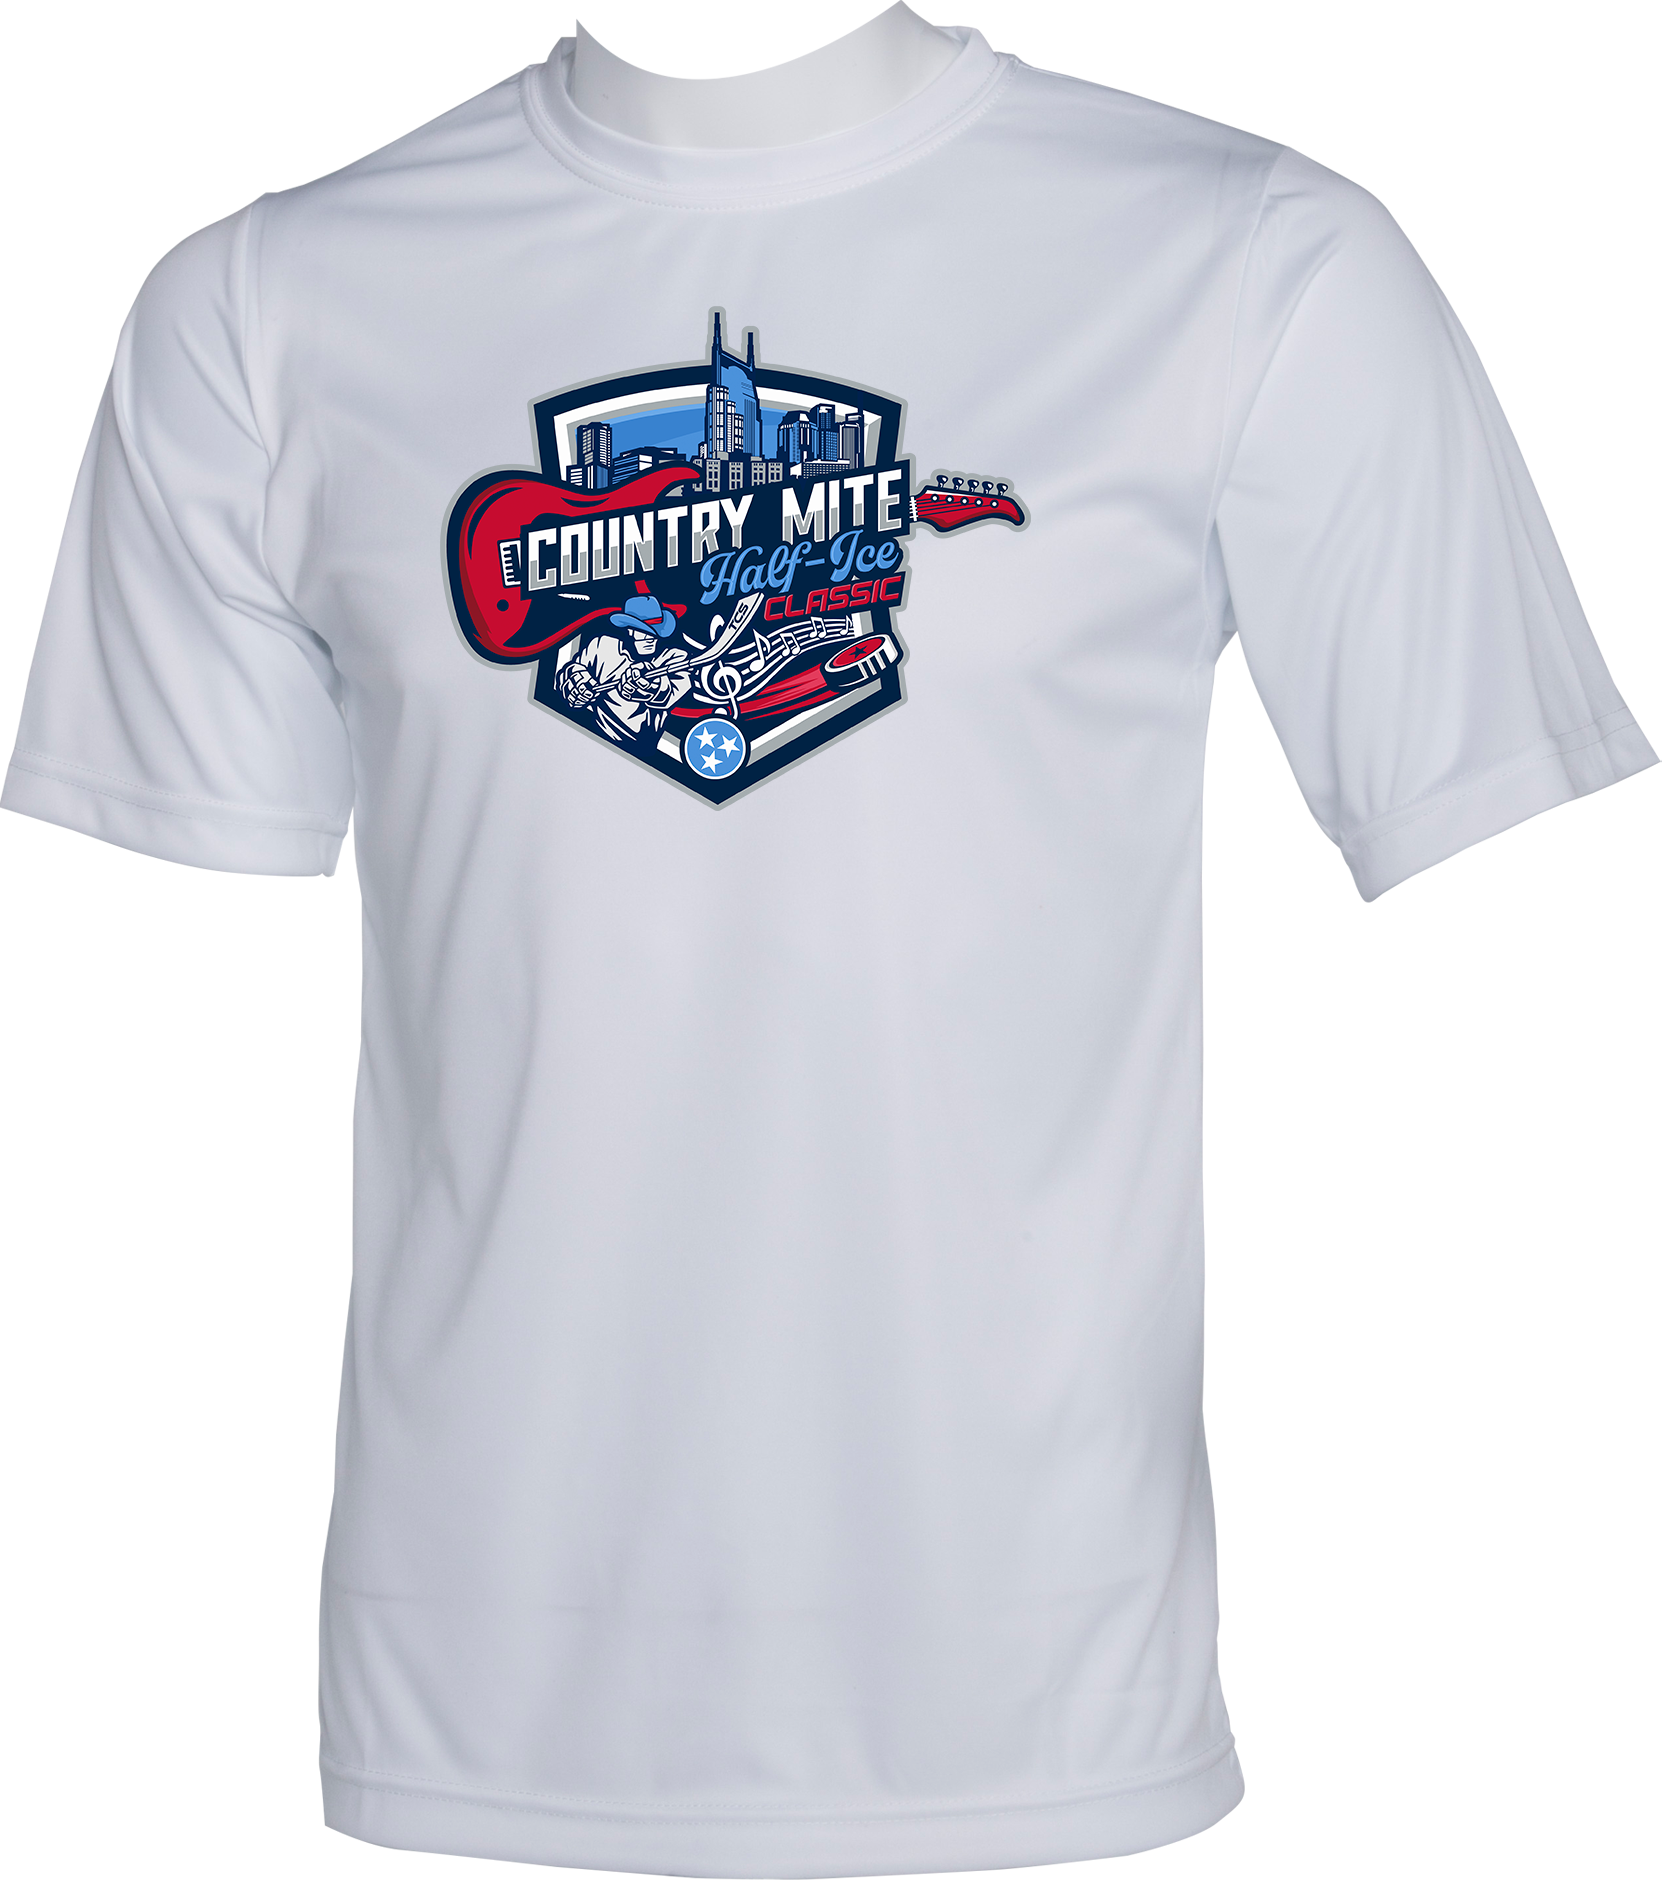 PERFORMANCE SHIRTS - 2023 Country Mite Half-Ice Classic